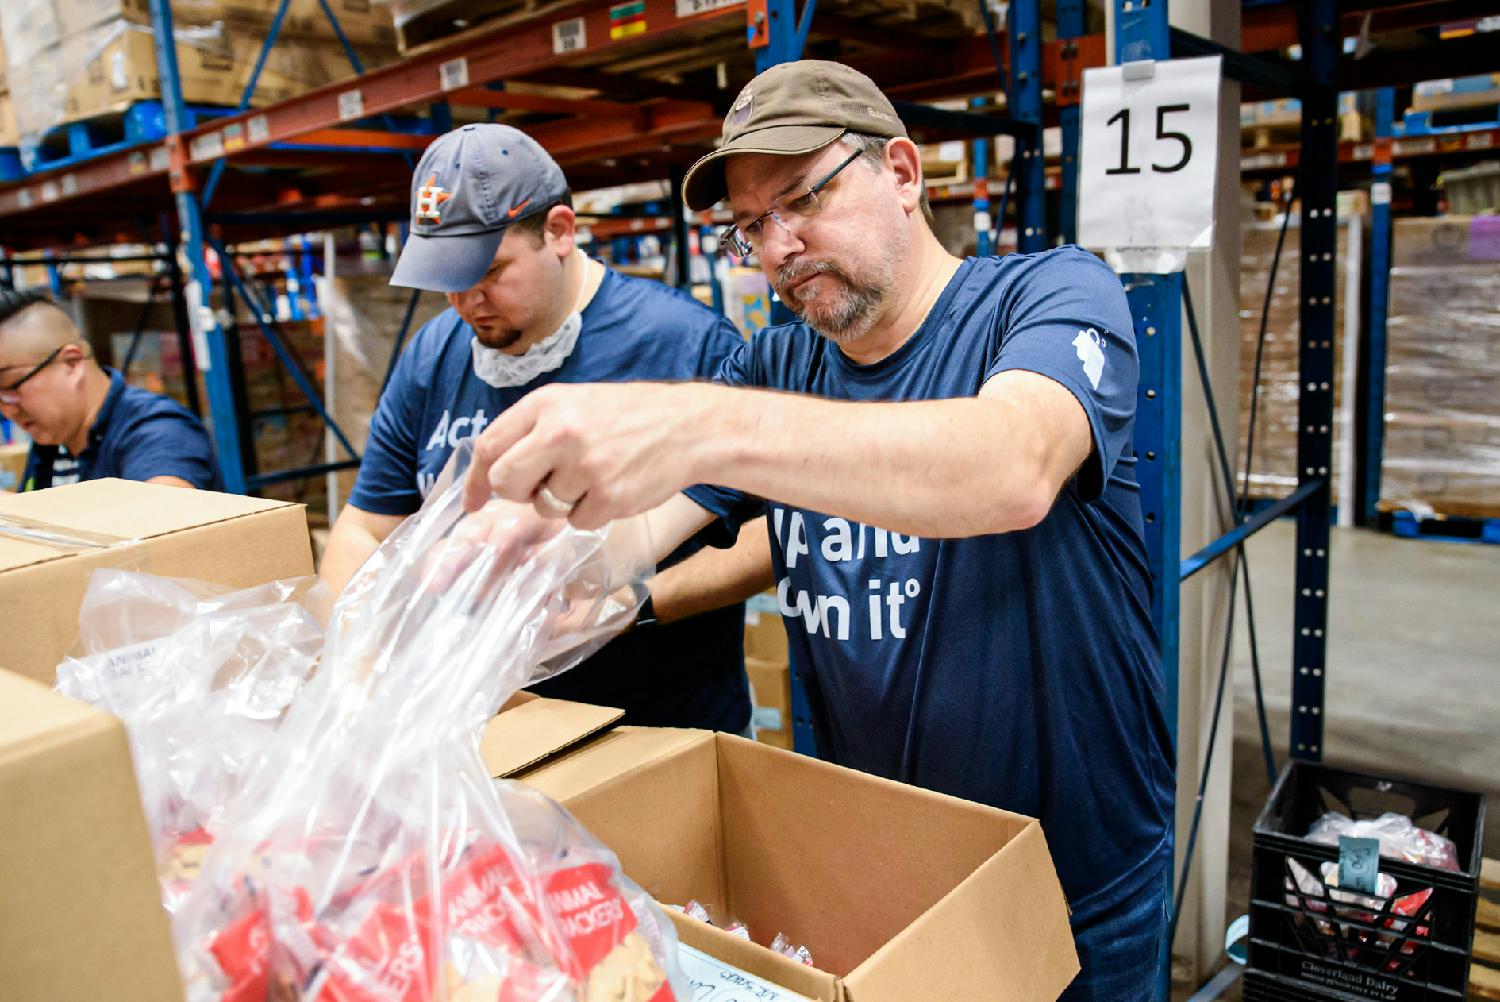 The BrandExtract team helps sort food donations at the Houston Food Bank.